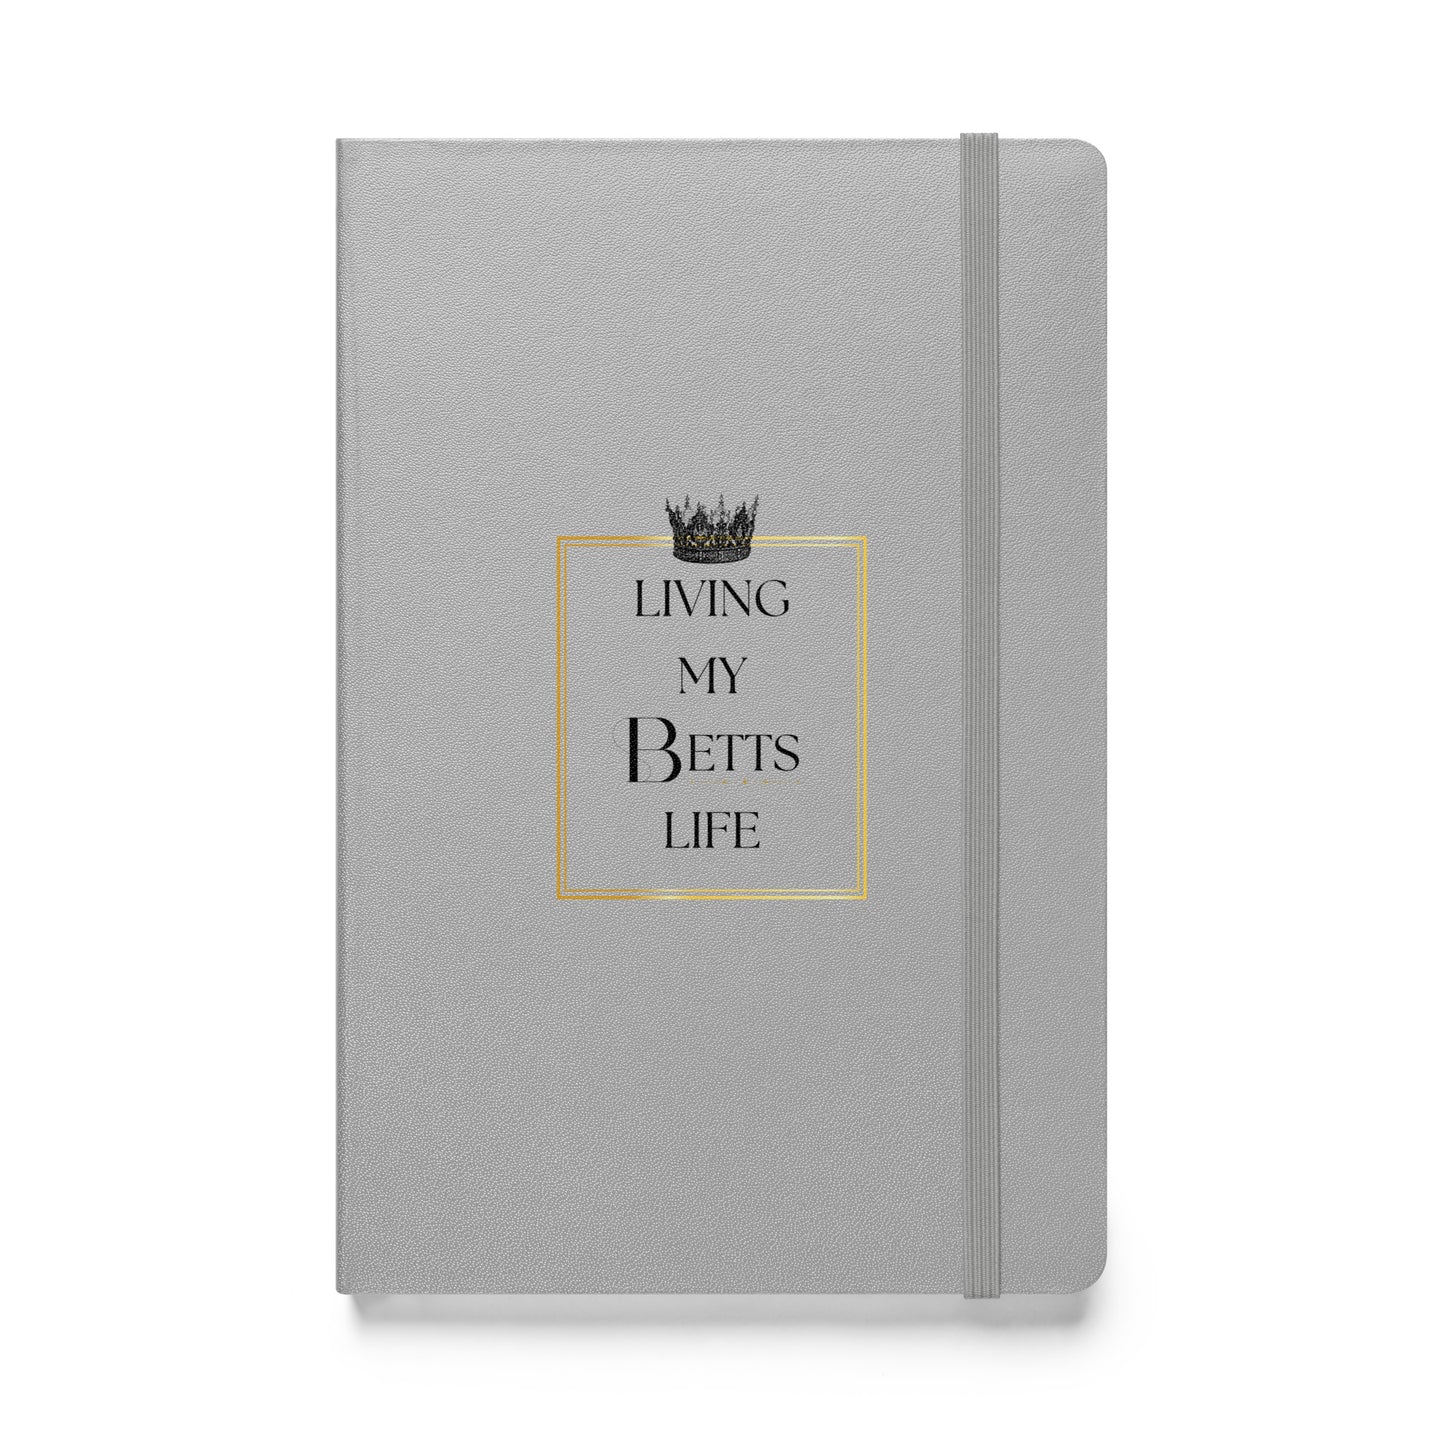 Living My Betts Life Hardcover Notebook